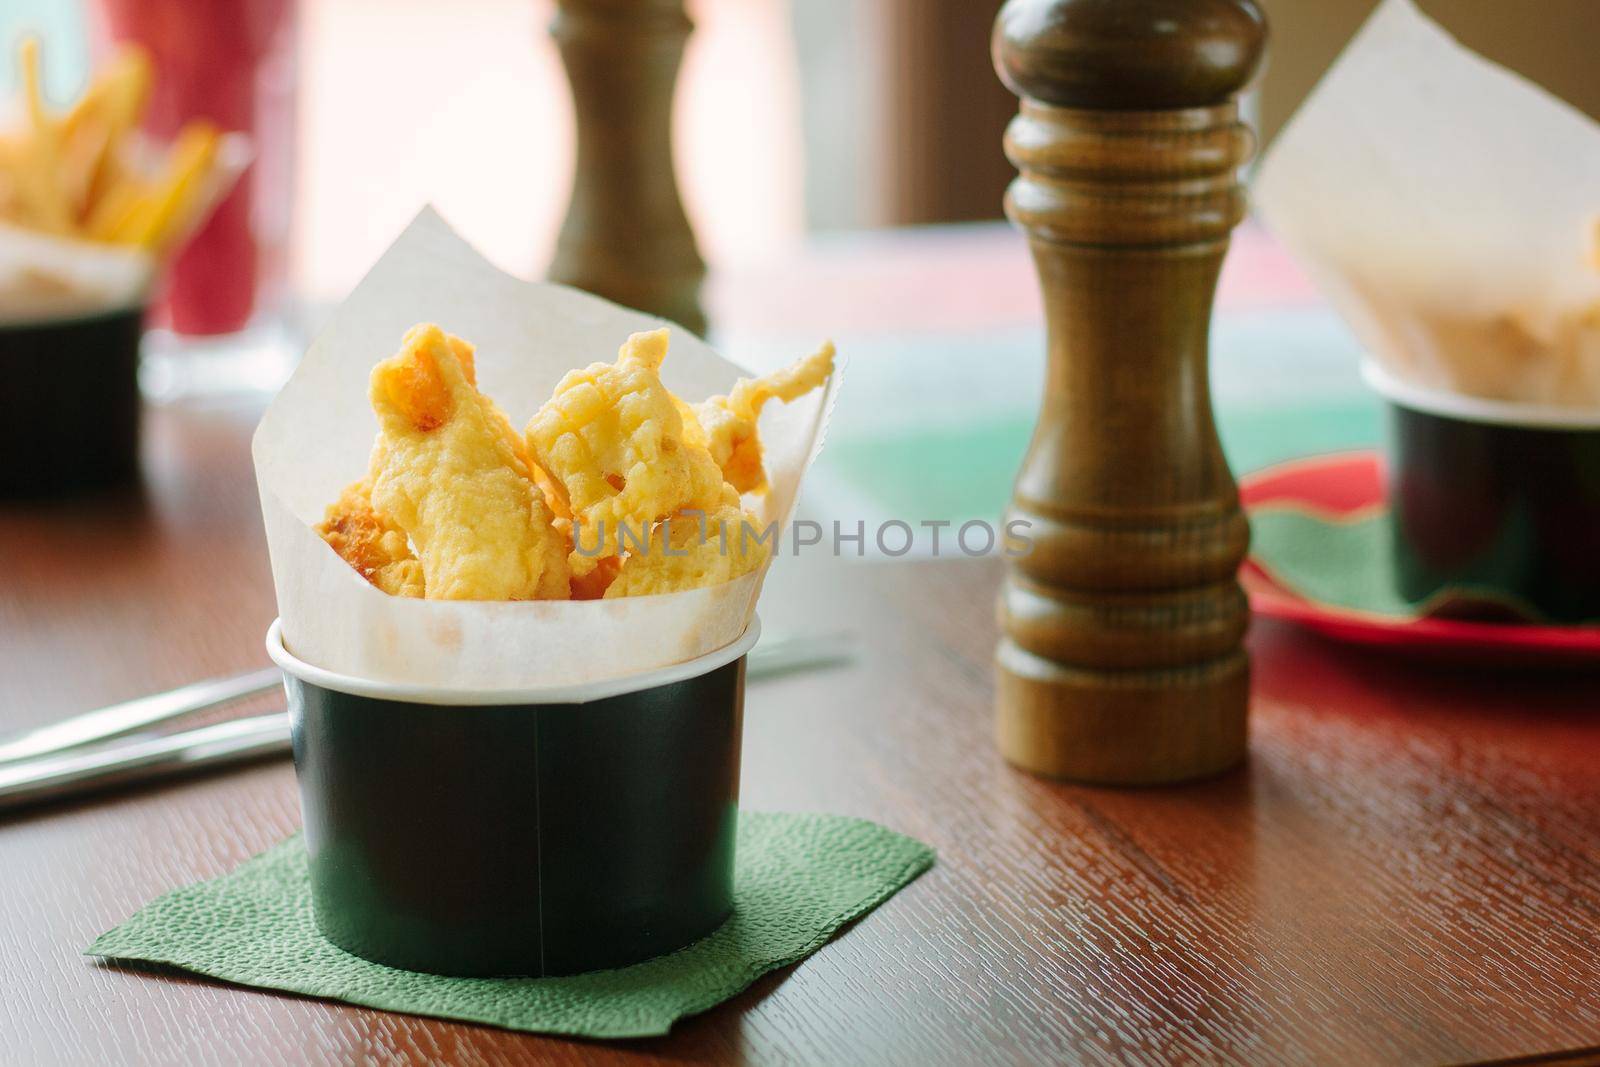 Pakora rolled to parchment in a black cup, over a wooden table, great image for your needs.